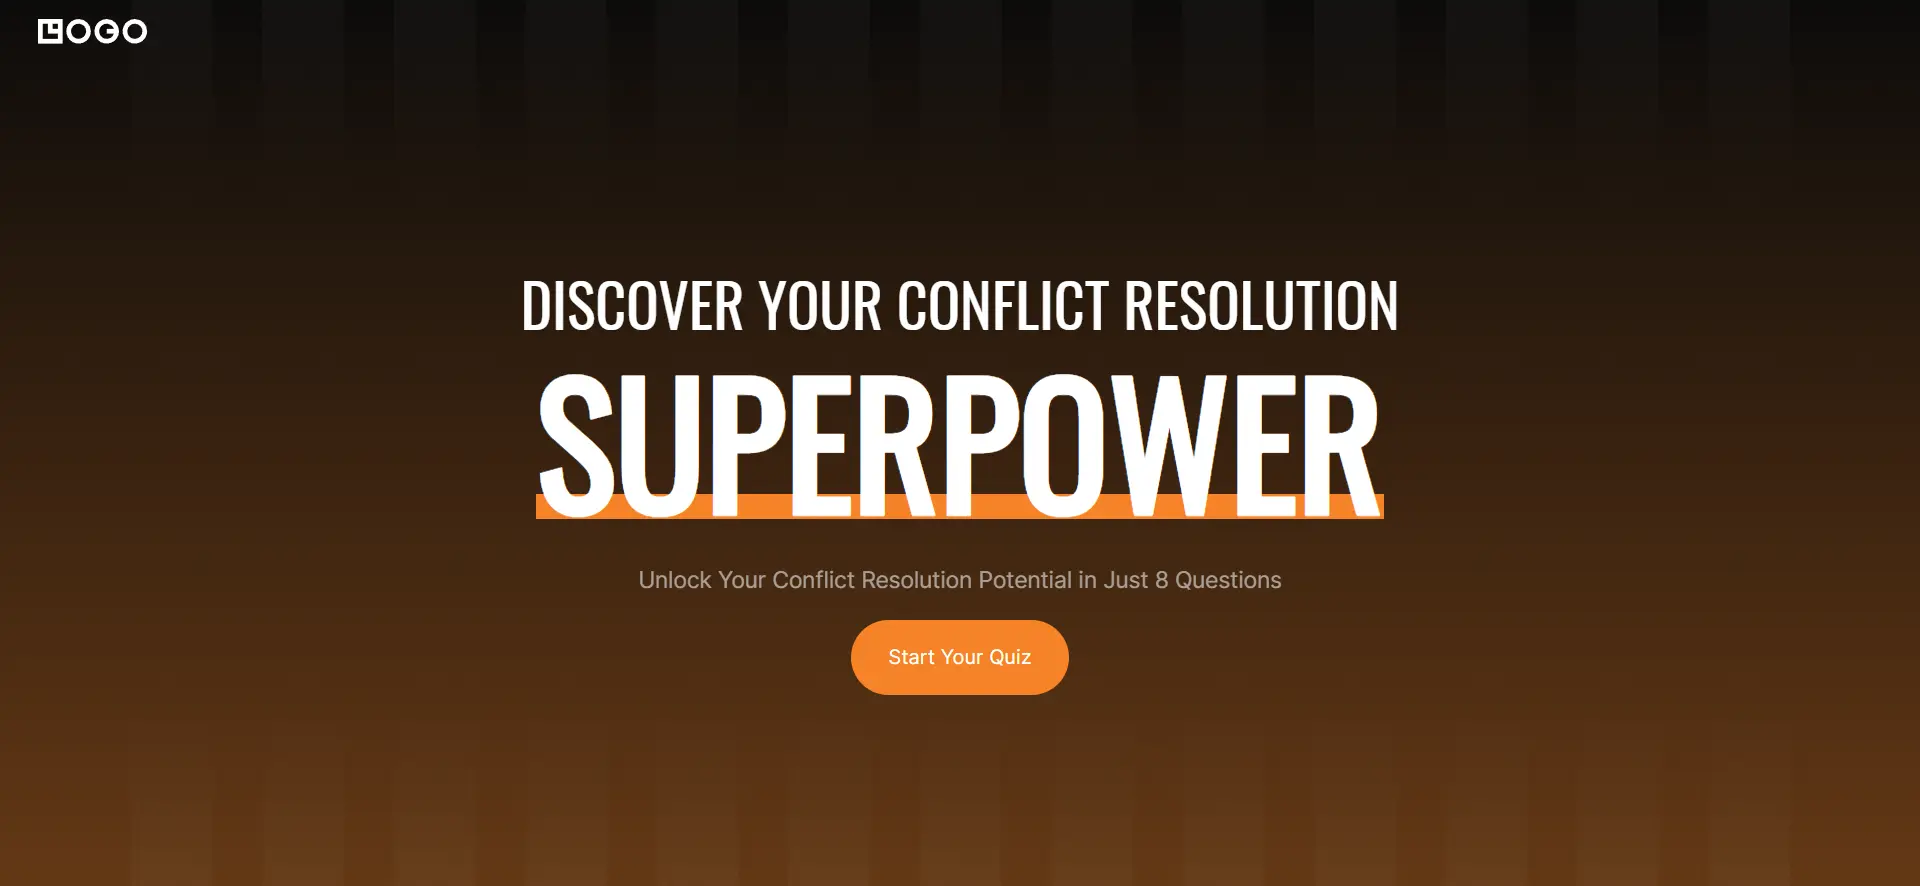 DISCOVER YOUR CONFLICT RESOLUTION SUPERPOWER